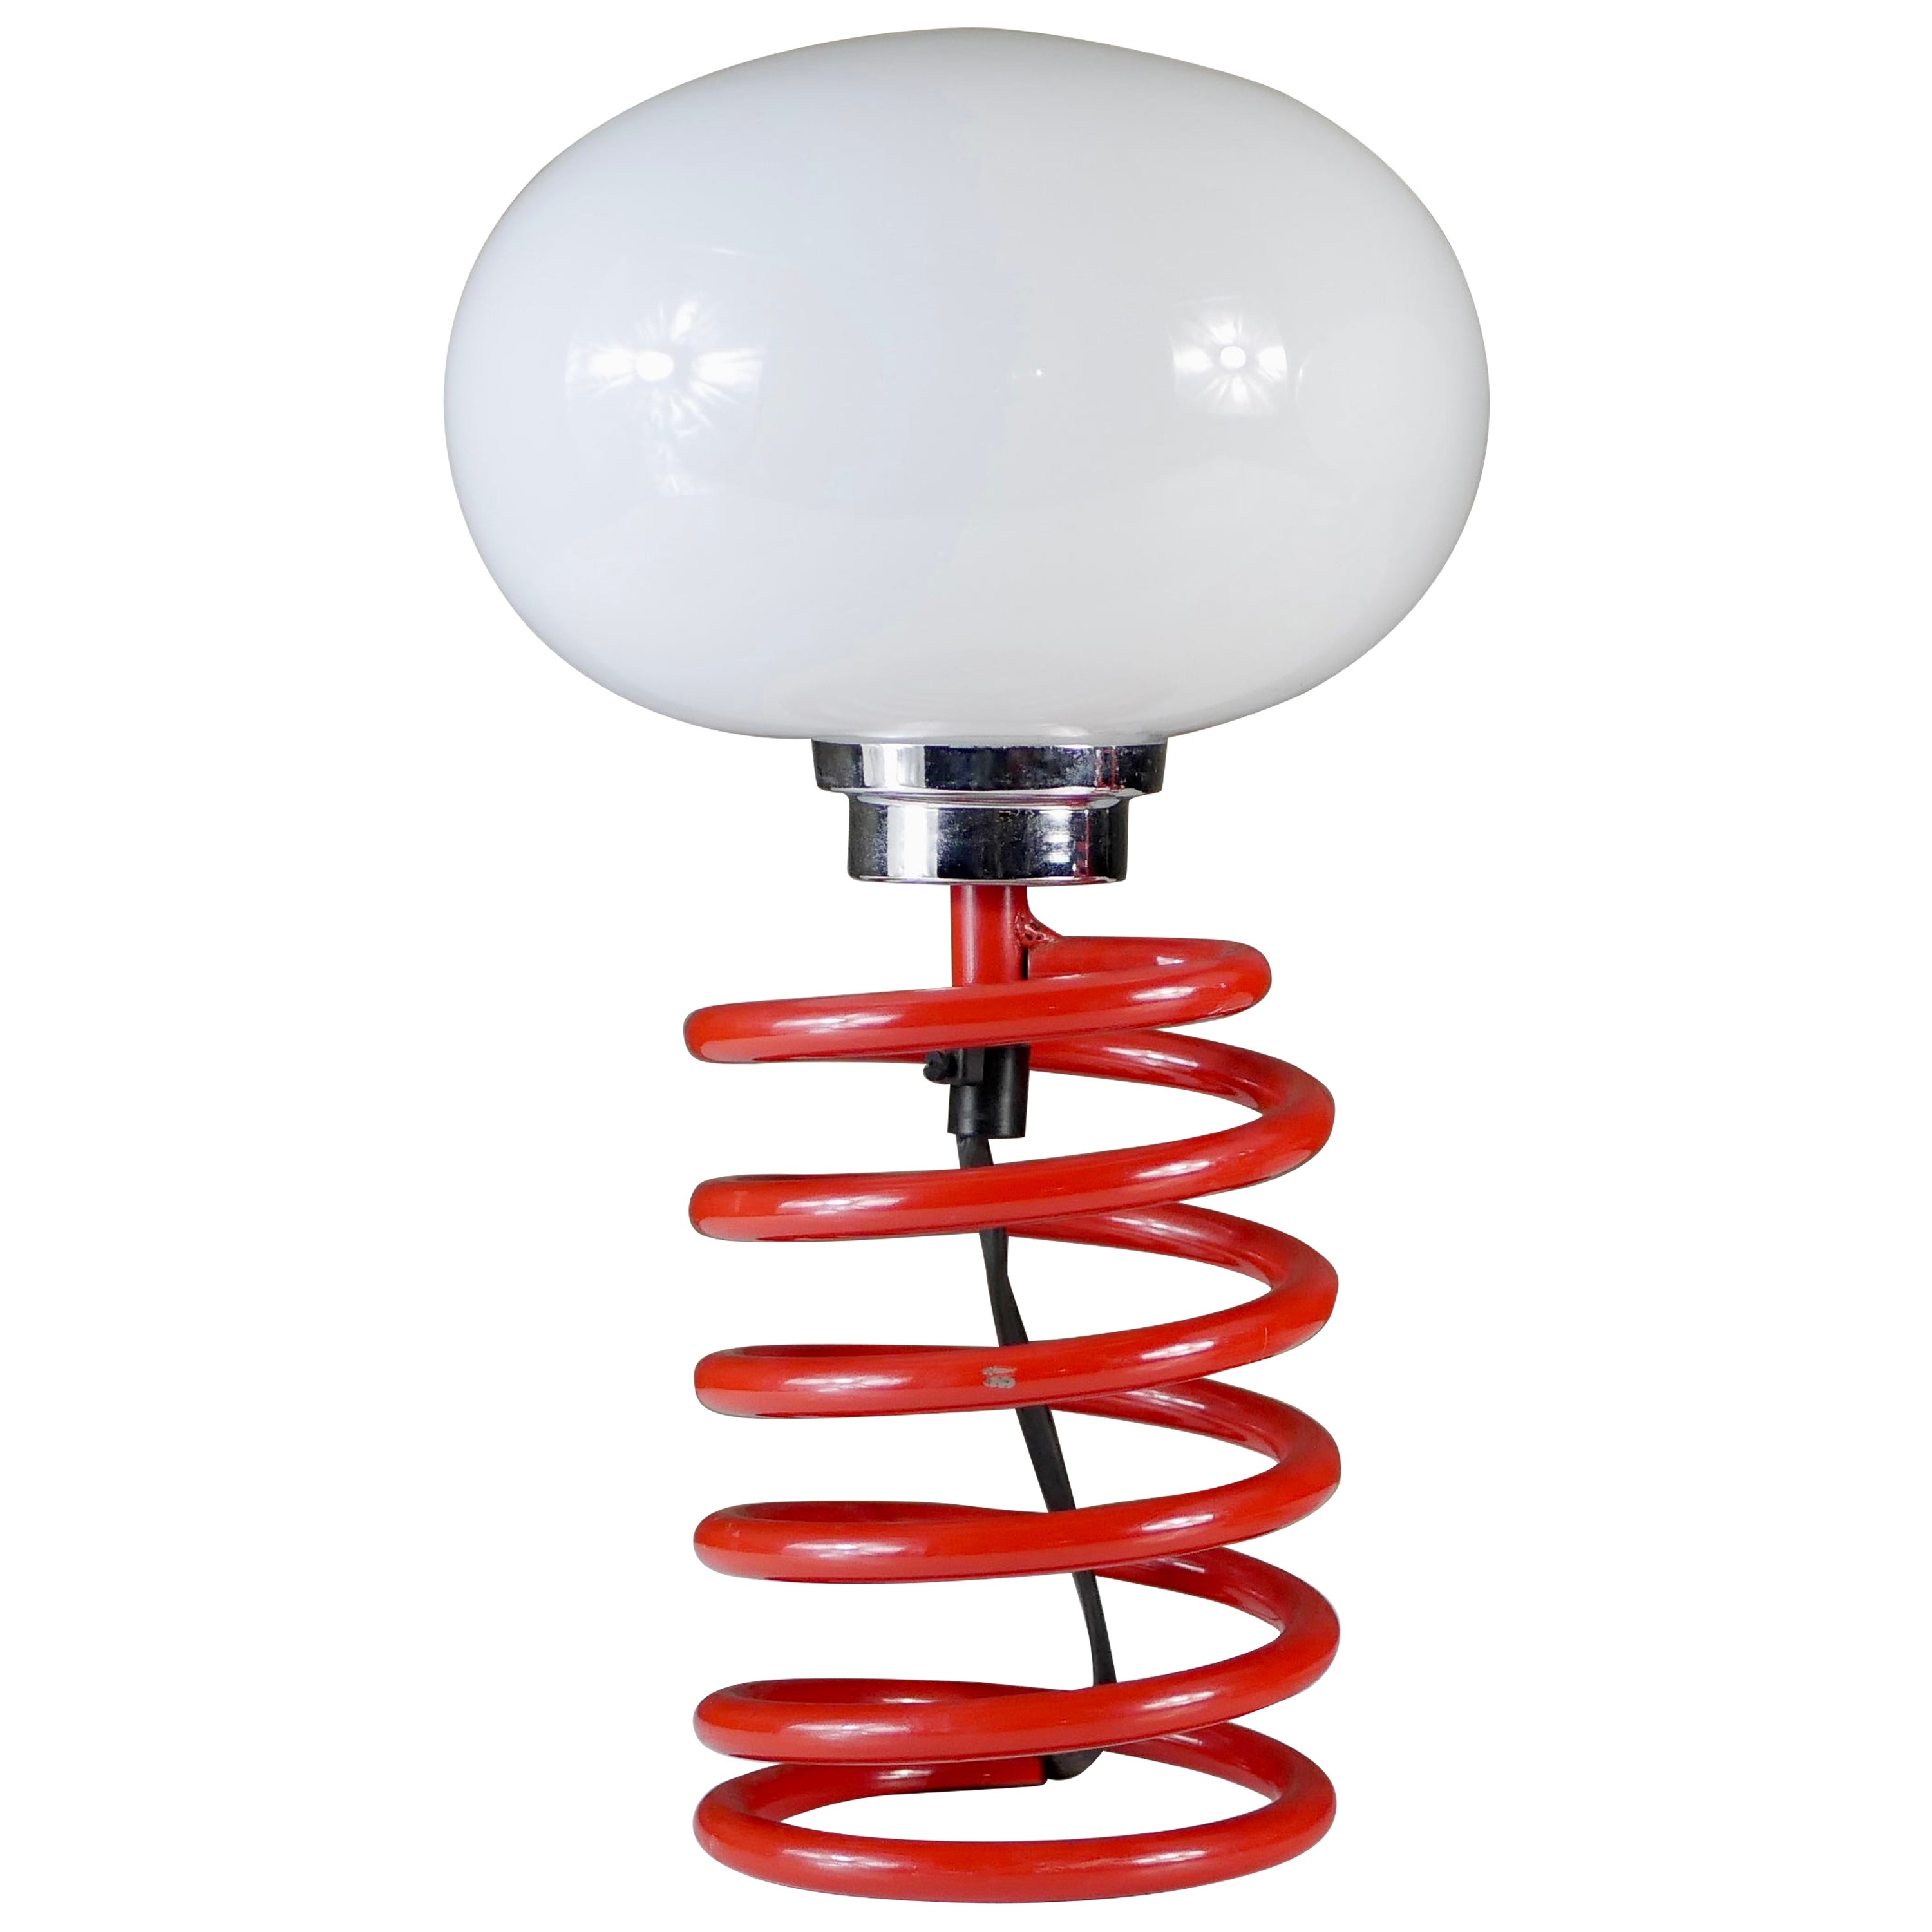 Red spring table lamp attributed to Ingo Maurer, 1970s